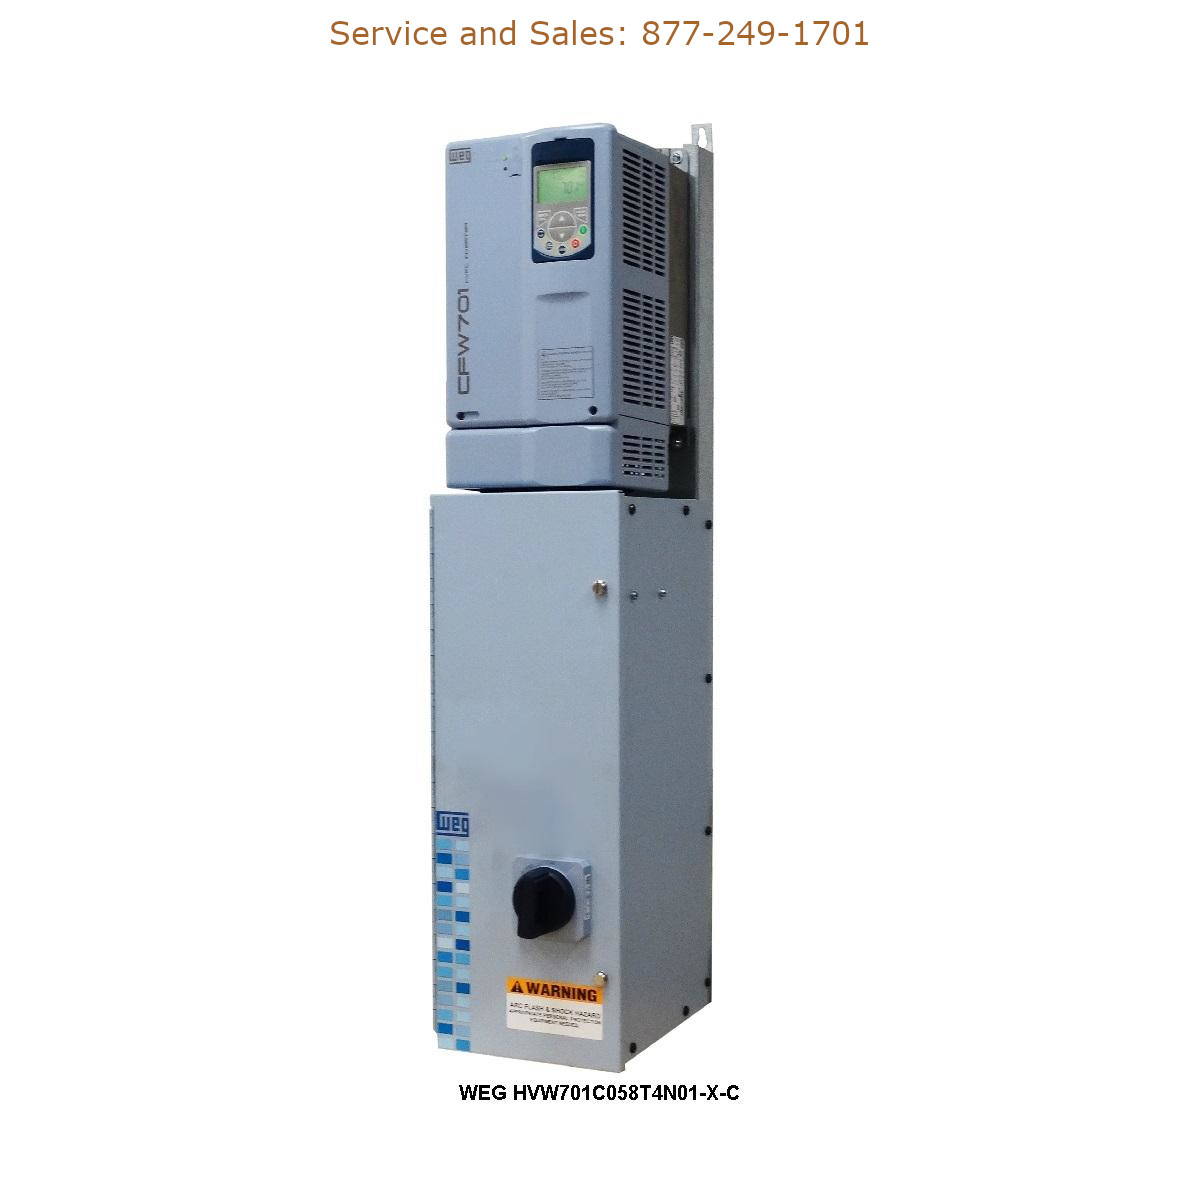 WEG HVW701C058T4N01-X-C WEG Model Number HVW701C058T4N01-X-C WEG Drives, Variable Speed Drives Repair Service, Troubleshooting, Replacement Parts https://gesrepair.com/wp-content/uploads/2022/WEG/WEG_HVW701C058T4N01-X-C_Drives_Variable_Speed_Drives.jpg